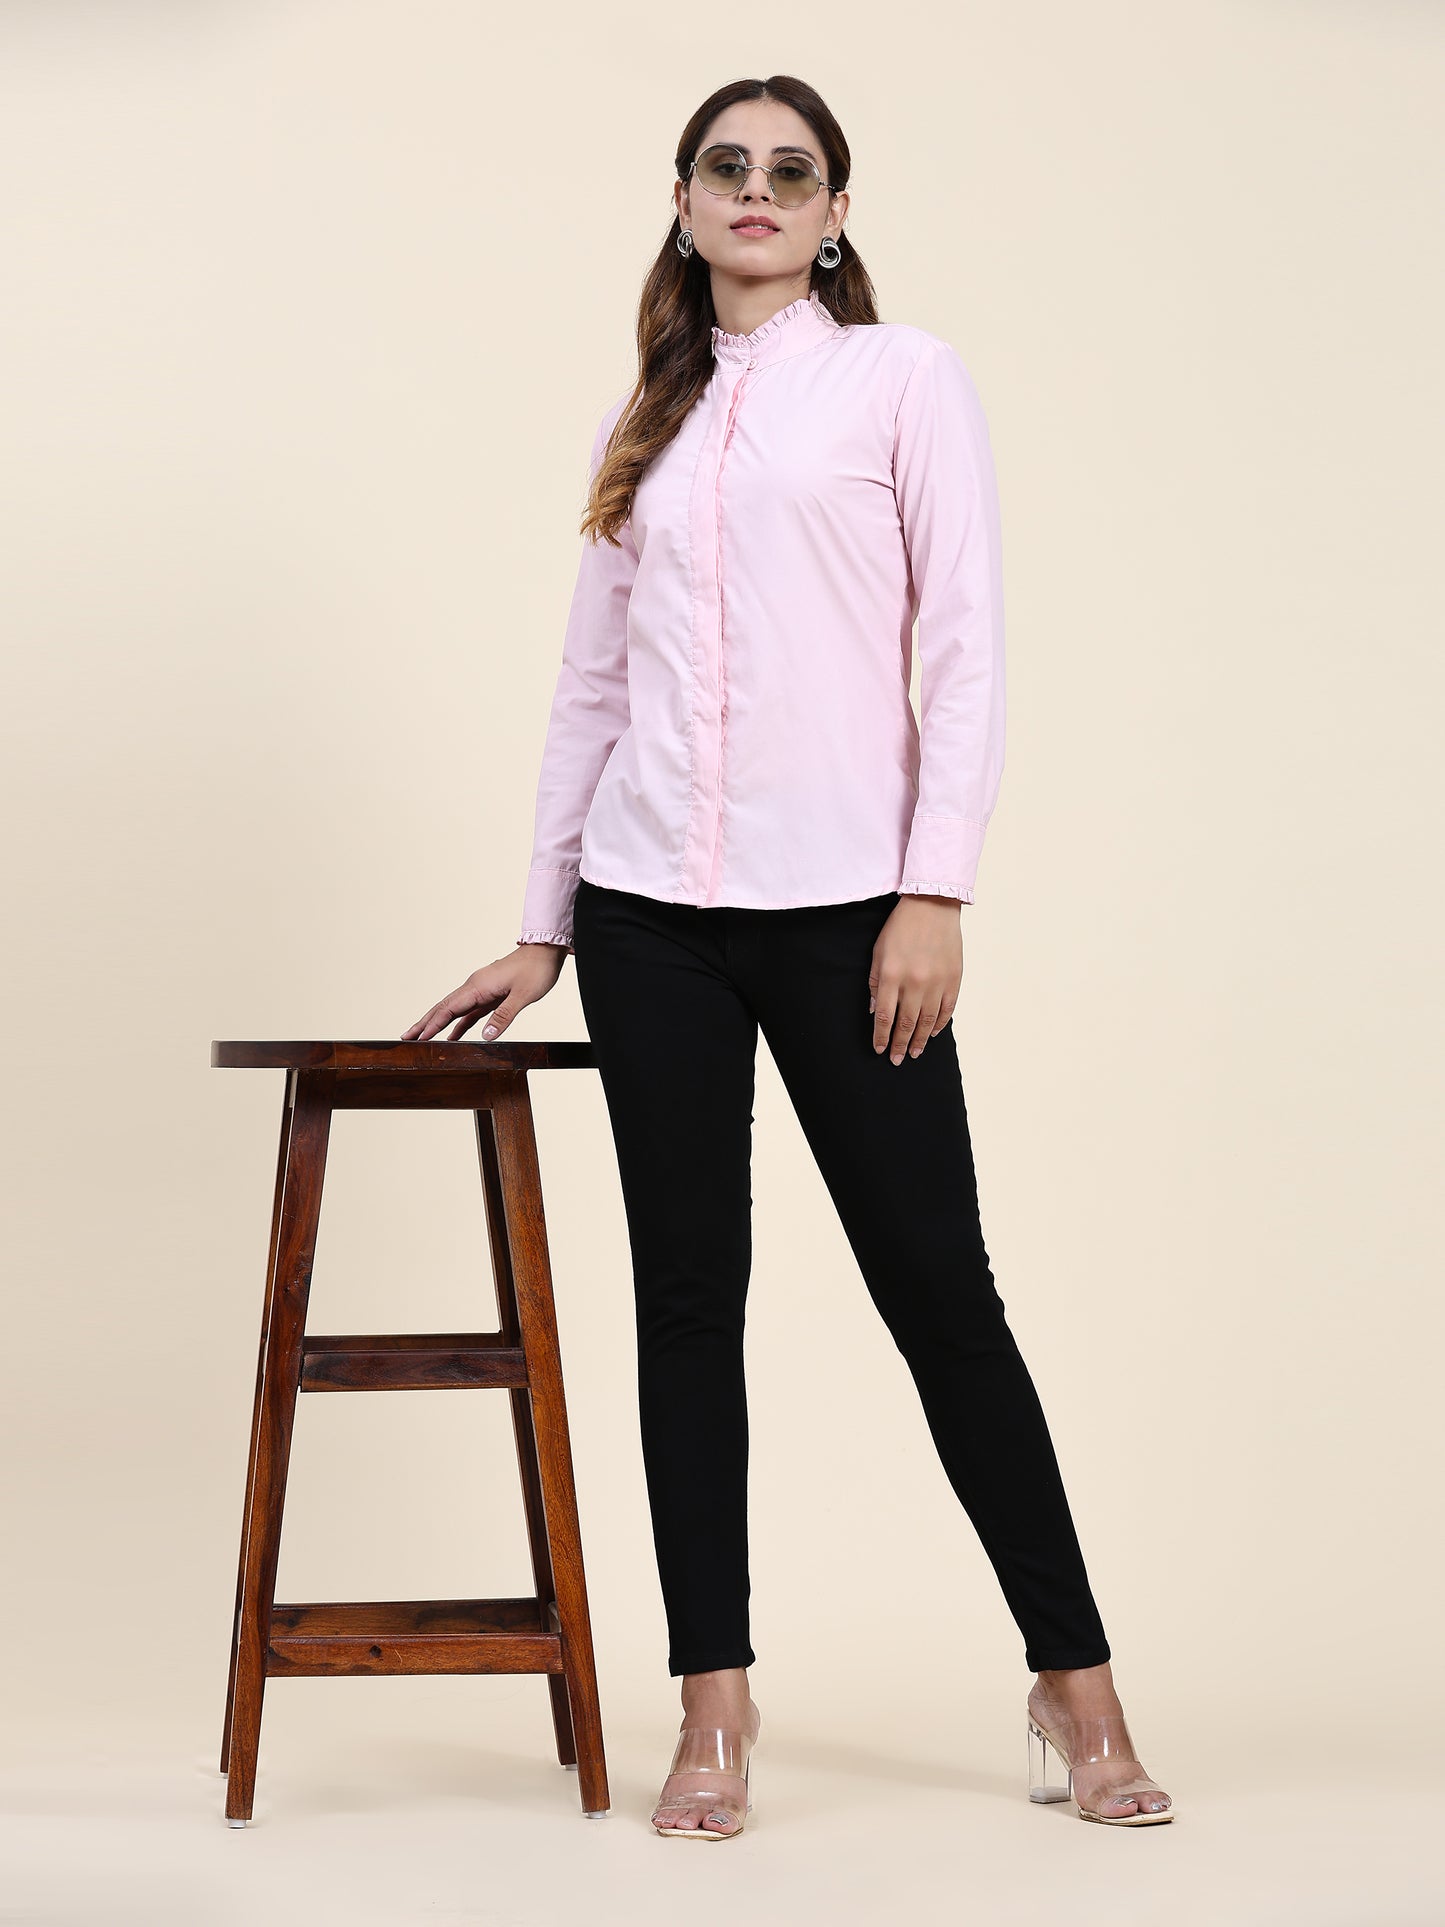 ANUSHIL Women's Cotton Shirts : Comfortable and Fashionable with Gathered Neck and Sleeves, Pink